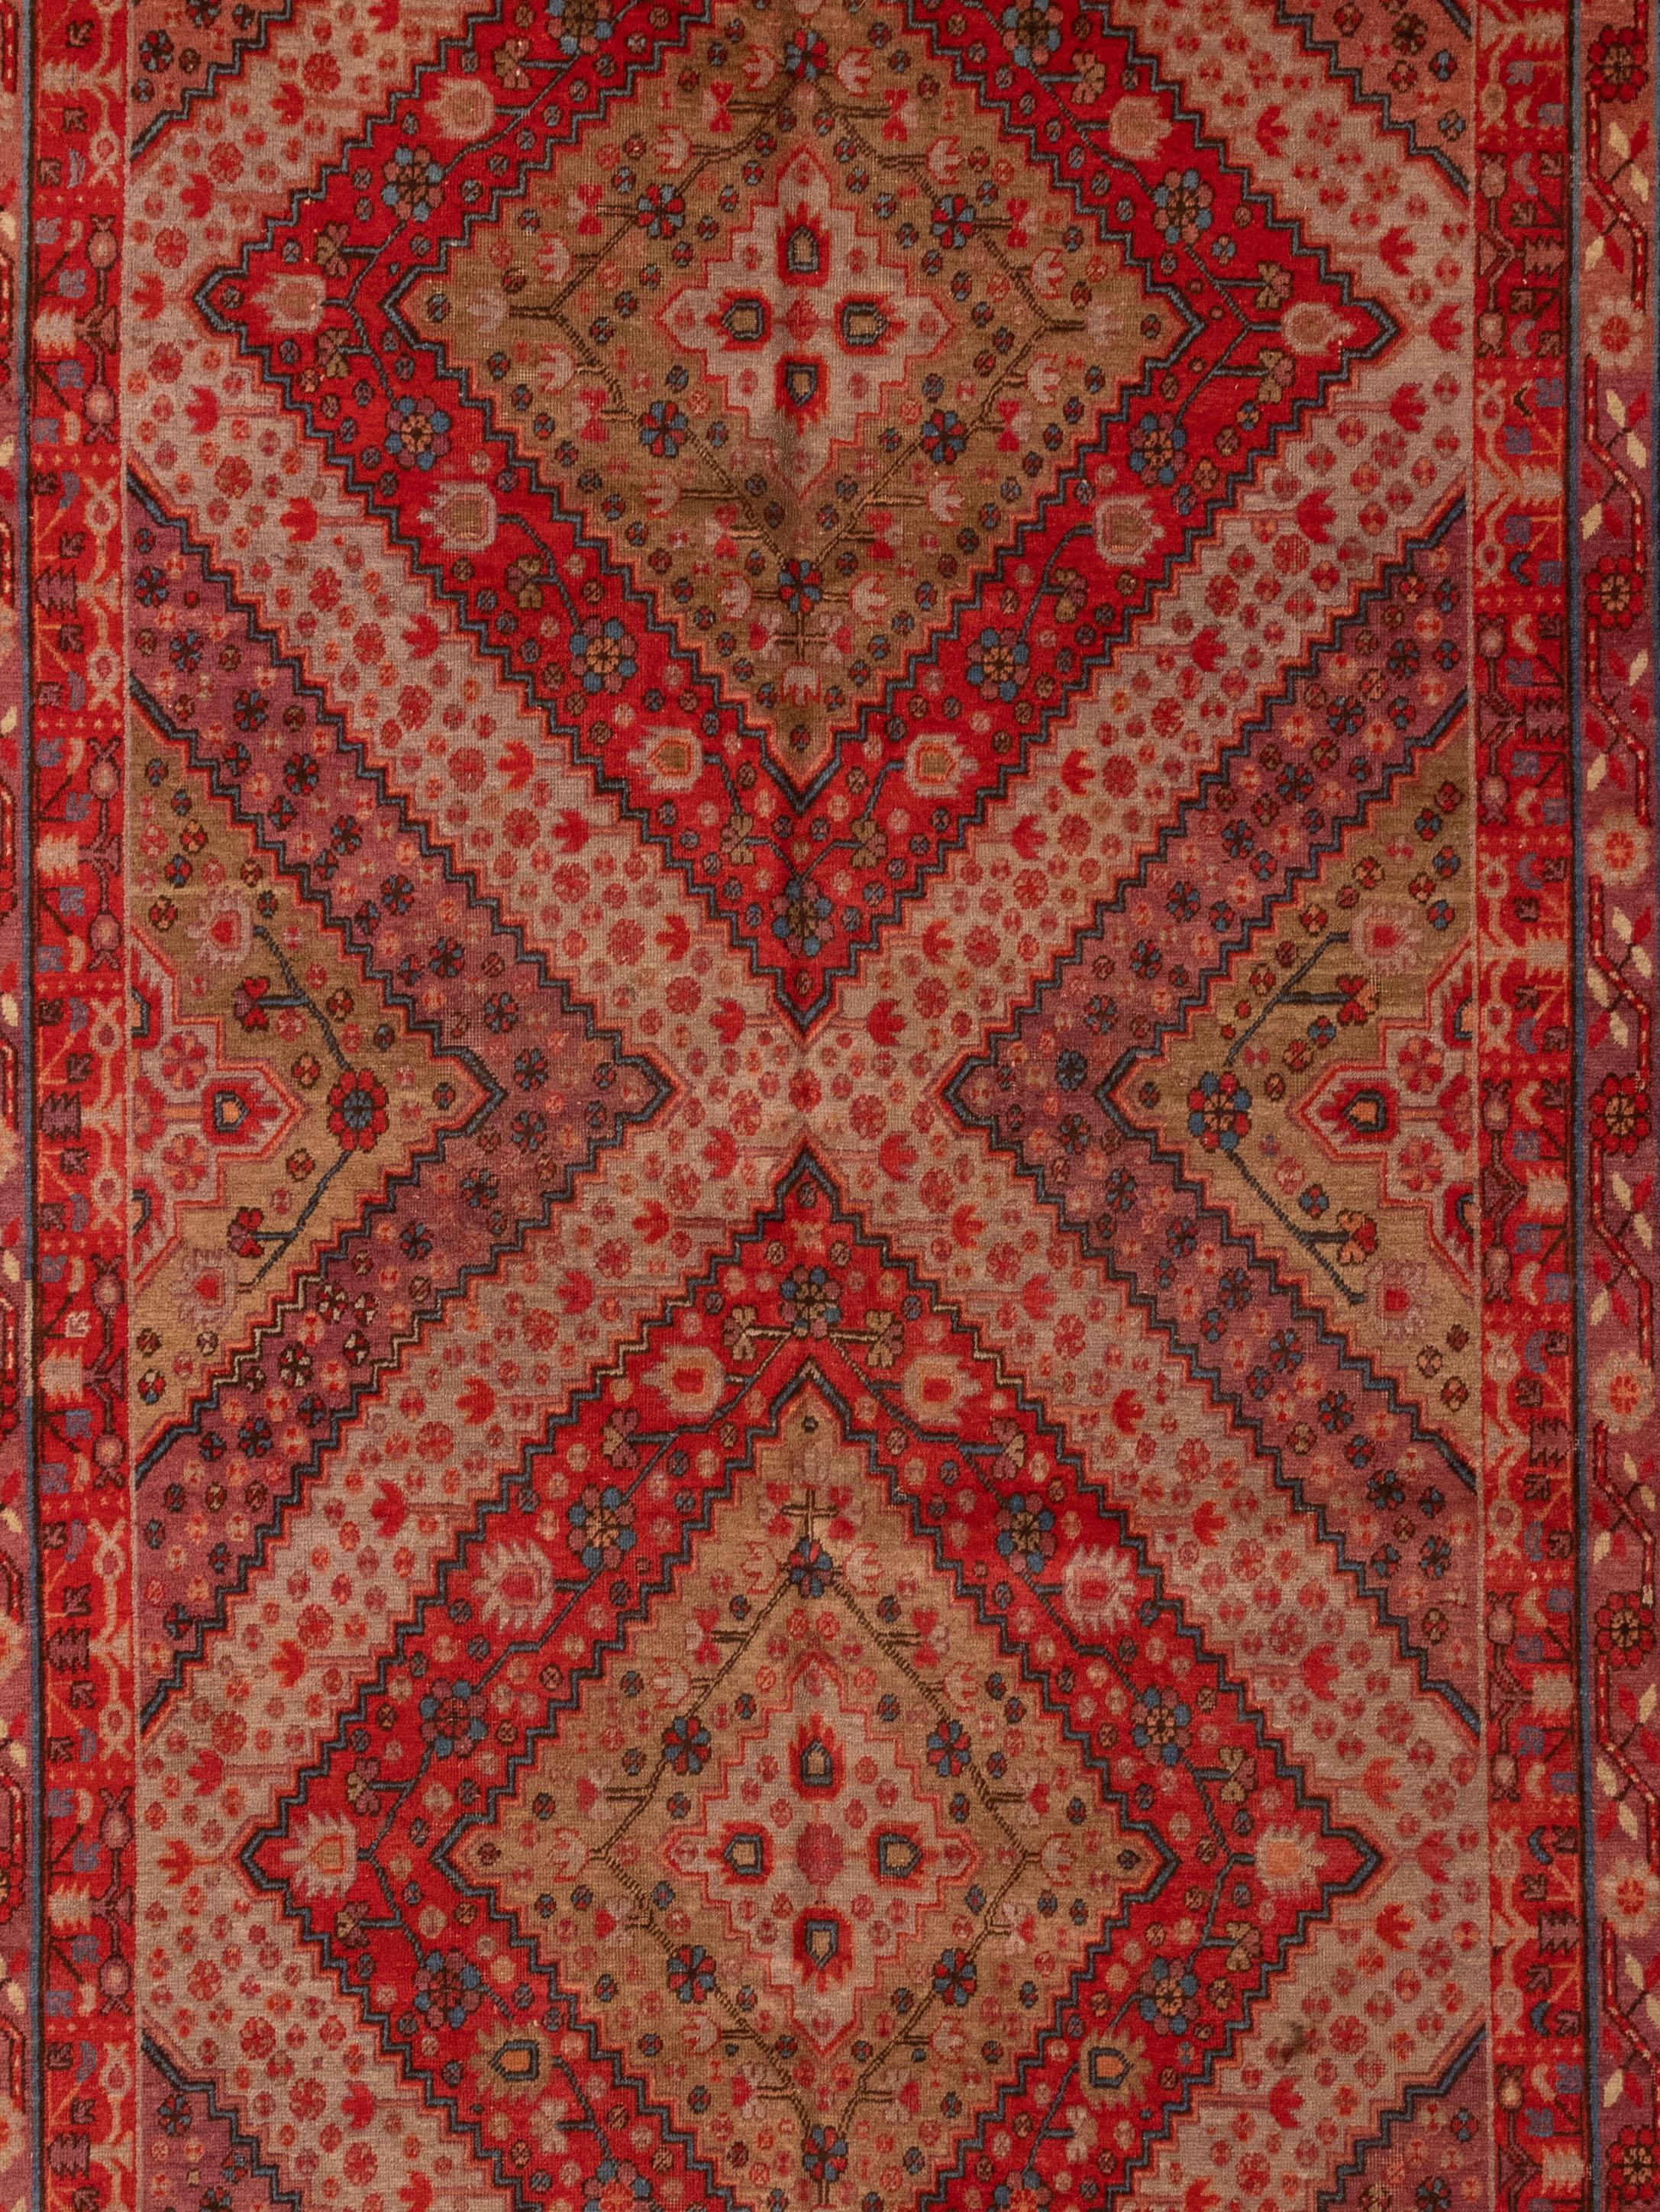 This is an antique Samarkand rug from east Turkistan. Samarkand rugs can be distinguished from other rugs through their style, which is an amalgamation of techniques from the west to China. 

The central design of this Samakand rug is two stylized